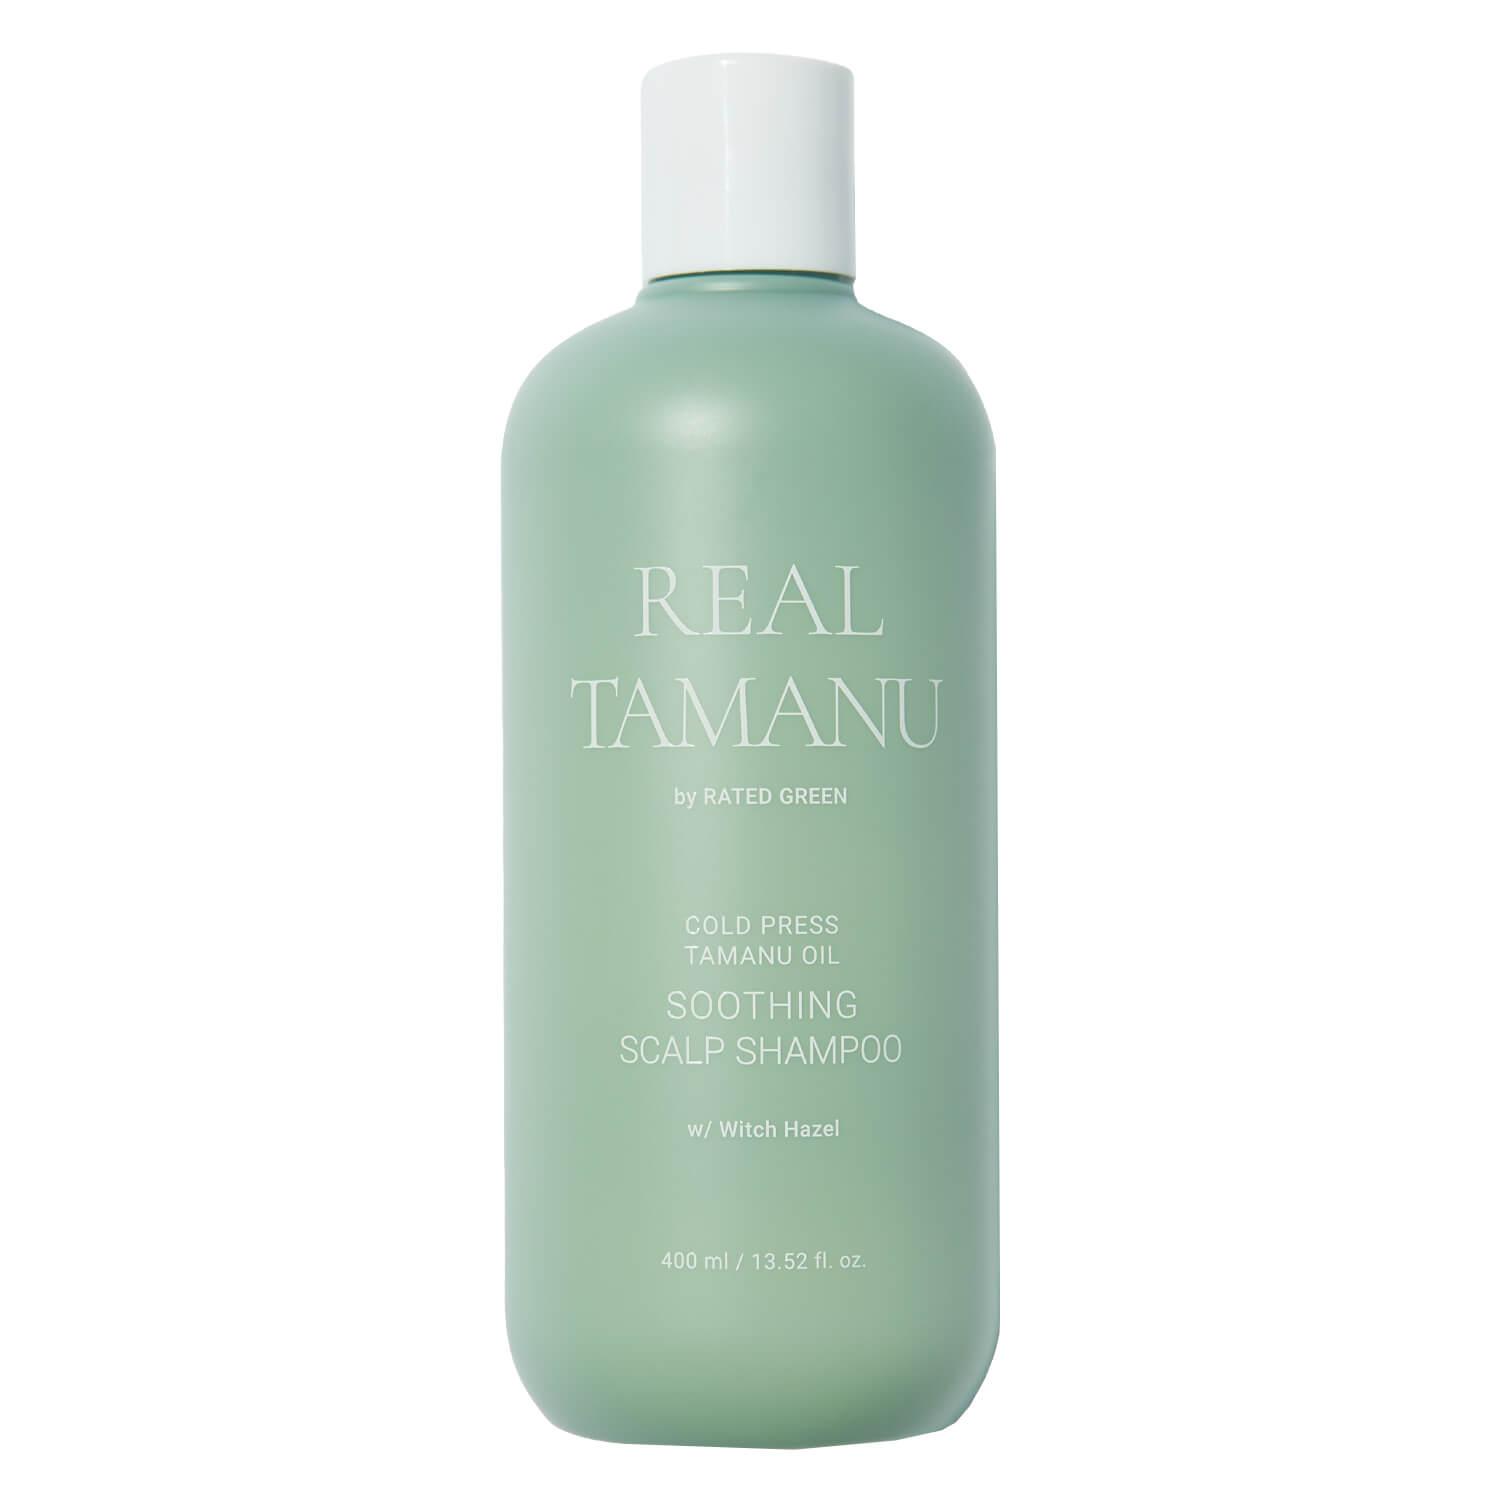 RATED GREEN - Cold Press Real Tamanu Oil Soothing Scalp Shampoo